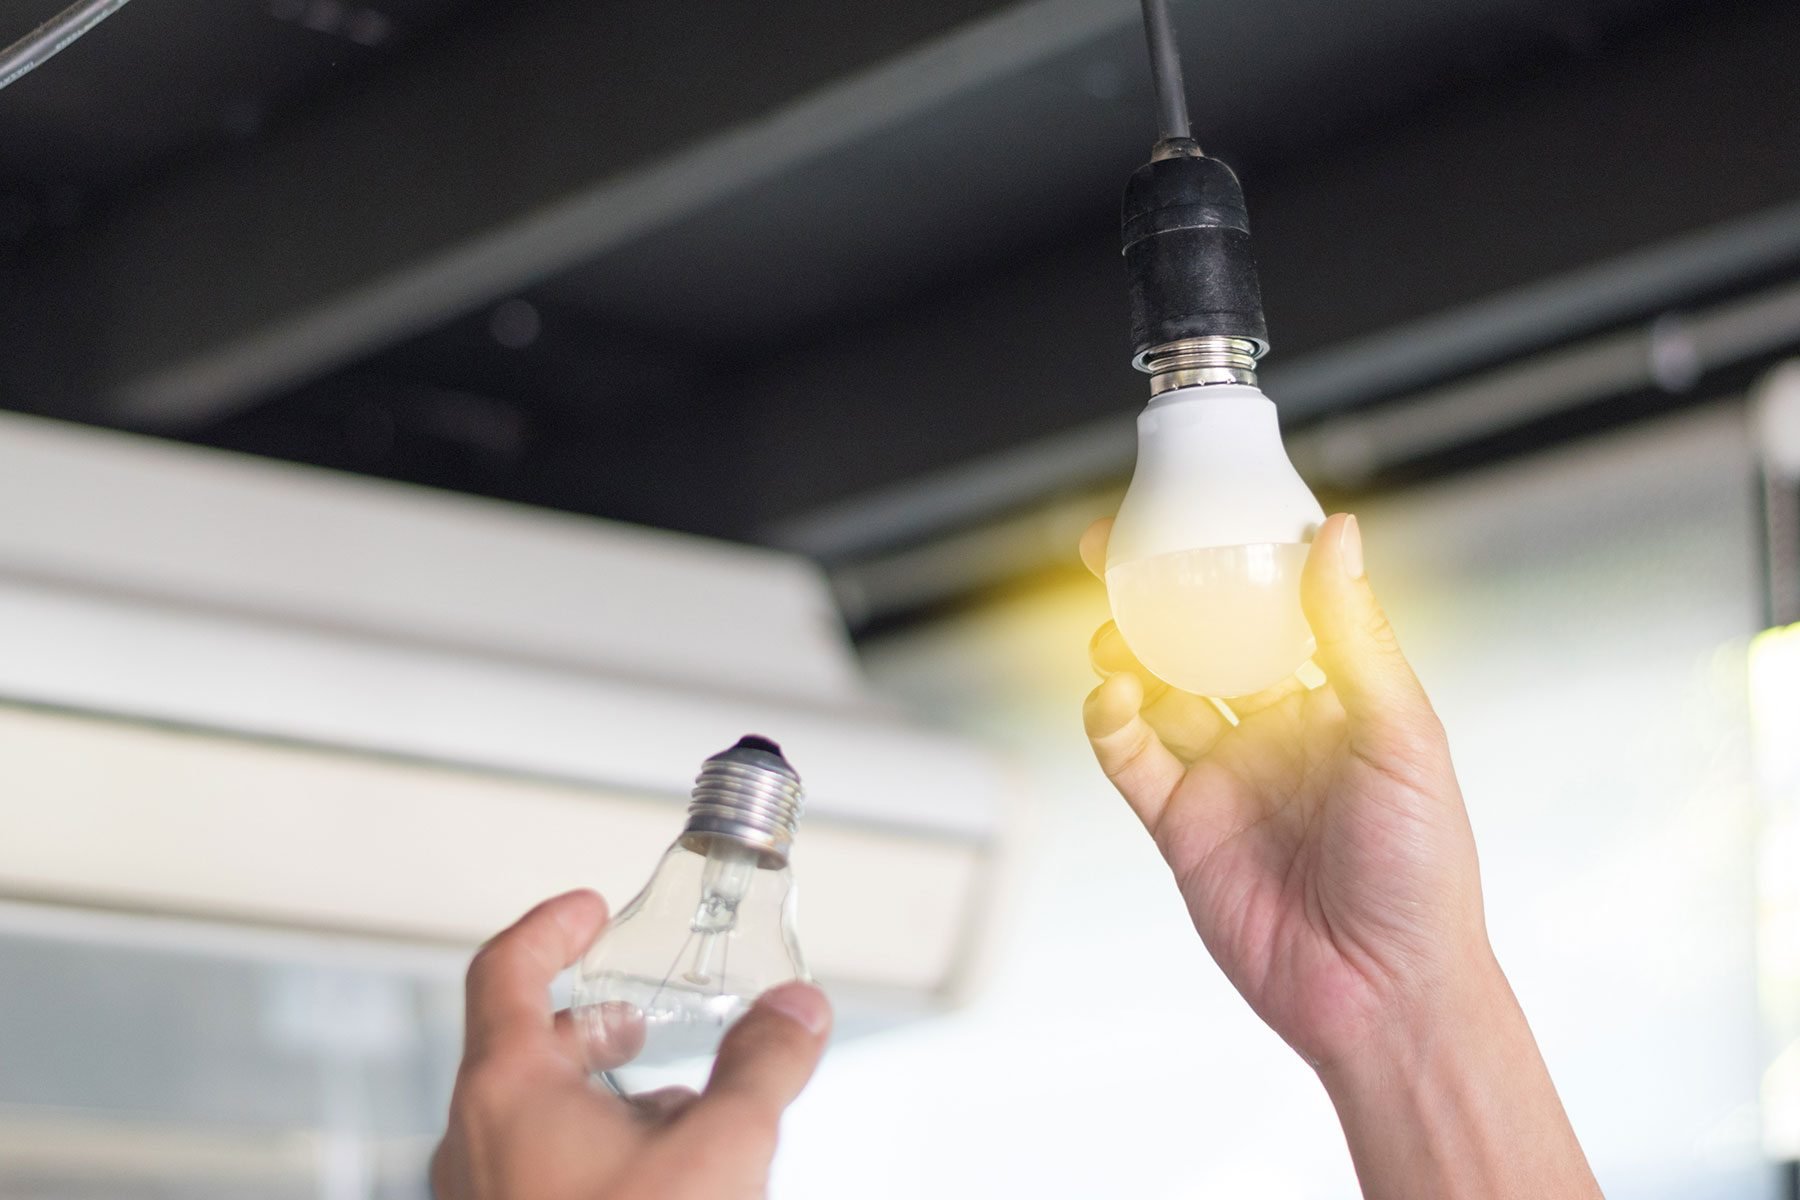 Man changes fluorescent bulbs with new LED light bulb